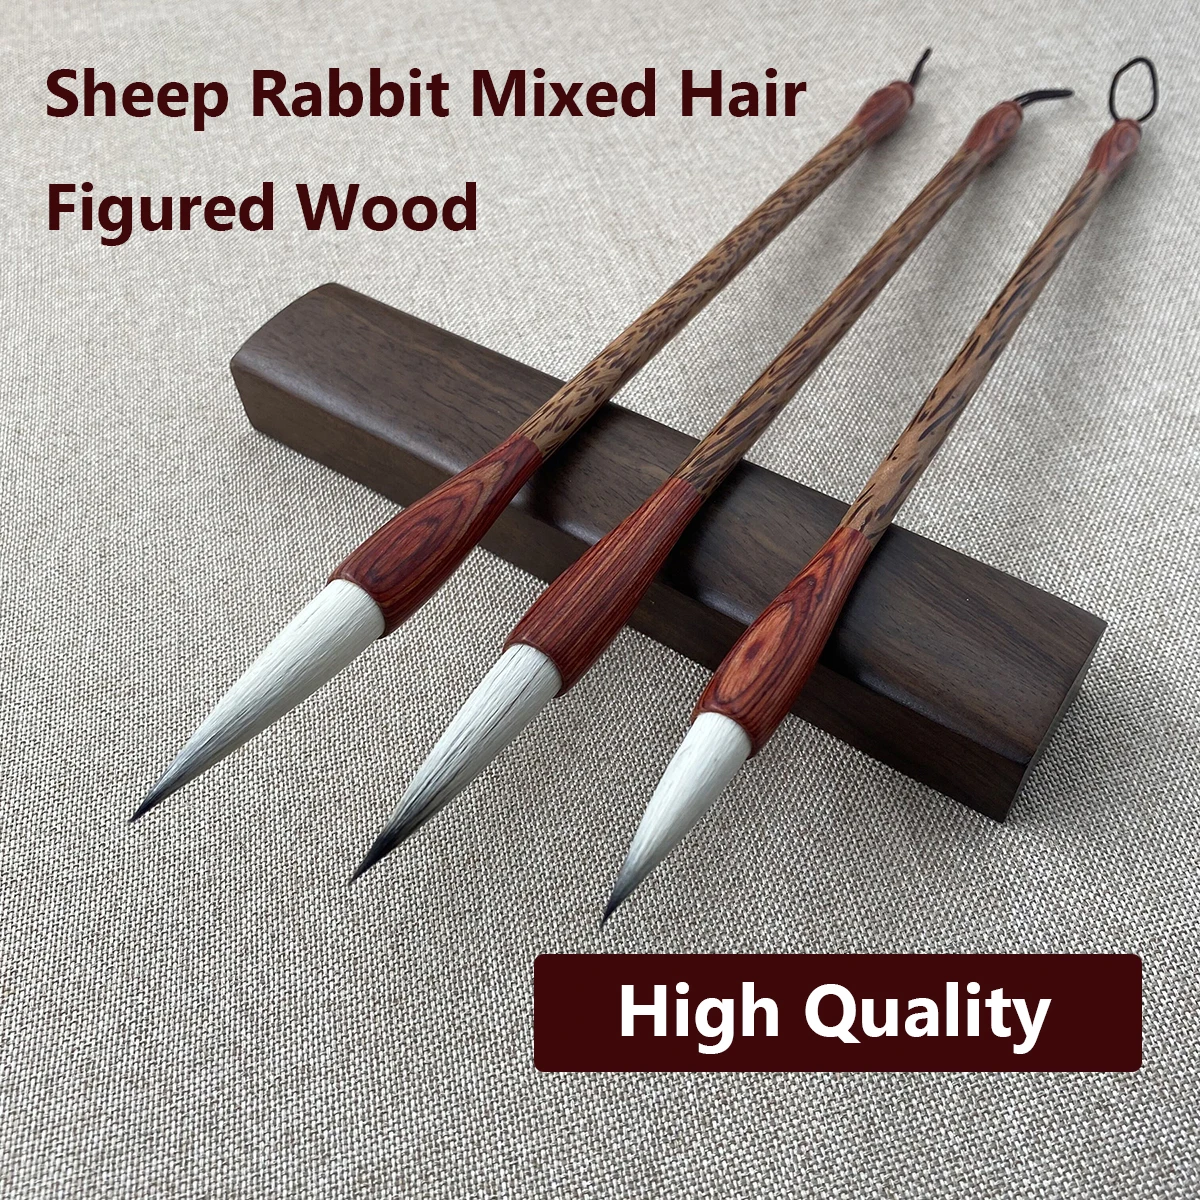 

Hair Chinese Figured Pen Writing Calligraphy Traditional Soft Mixed Rabbit Brush Professional Sheep Ink Painting Wood Boutique